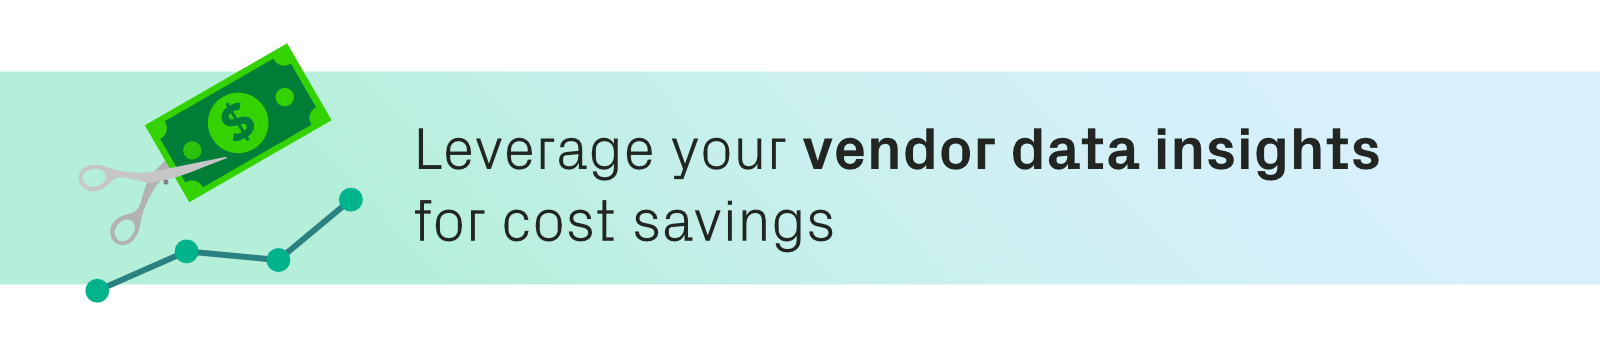 Leverage your vendor data insights for cost savings